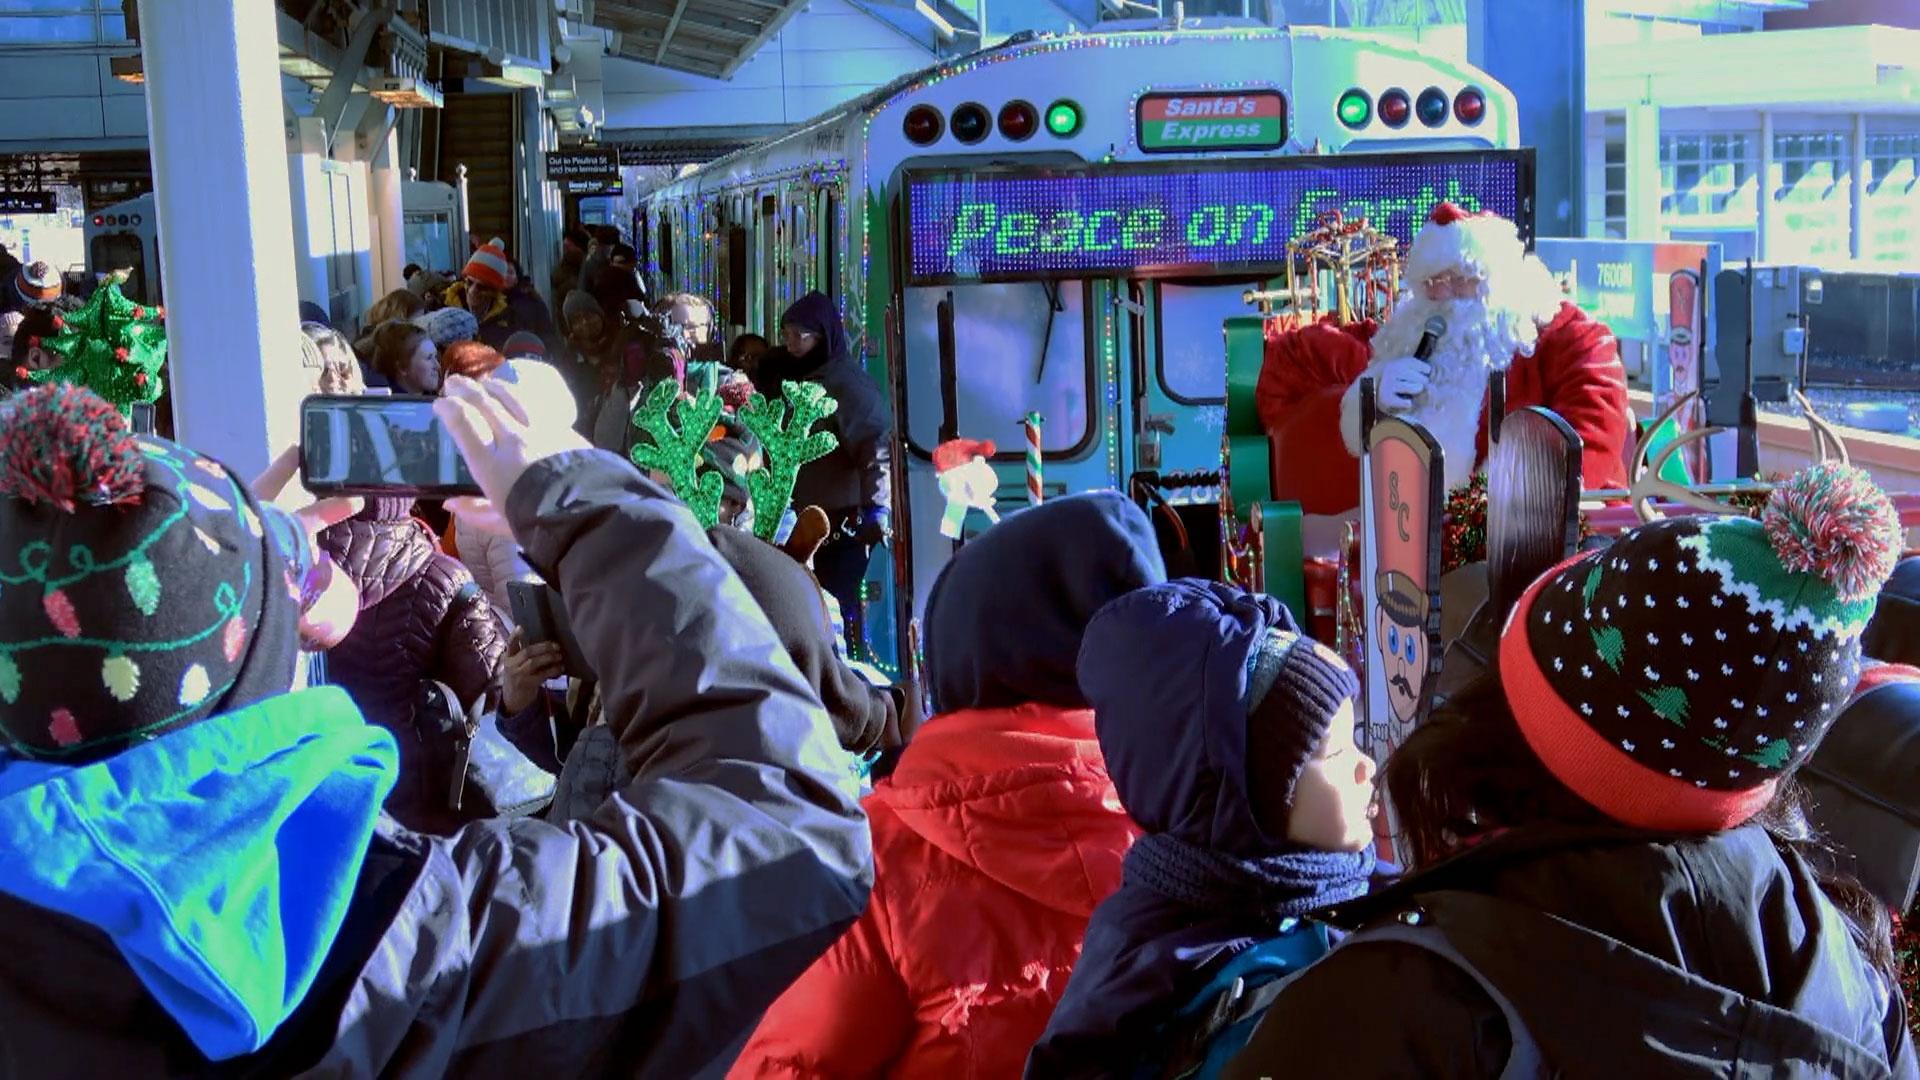 All Aboard Chicago’s Holiday Train